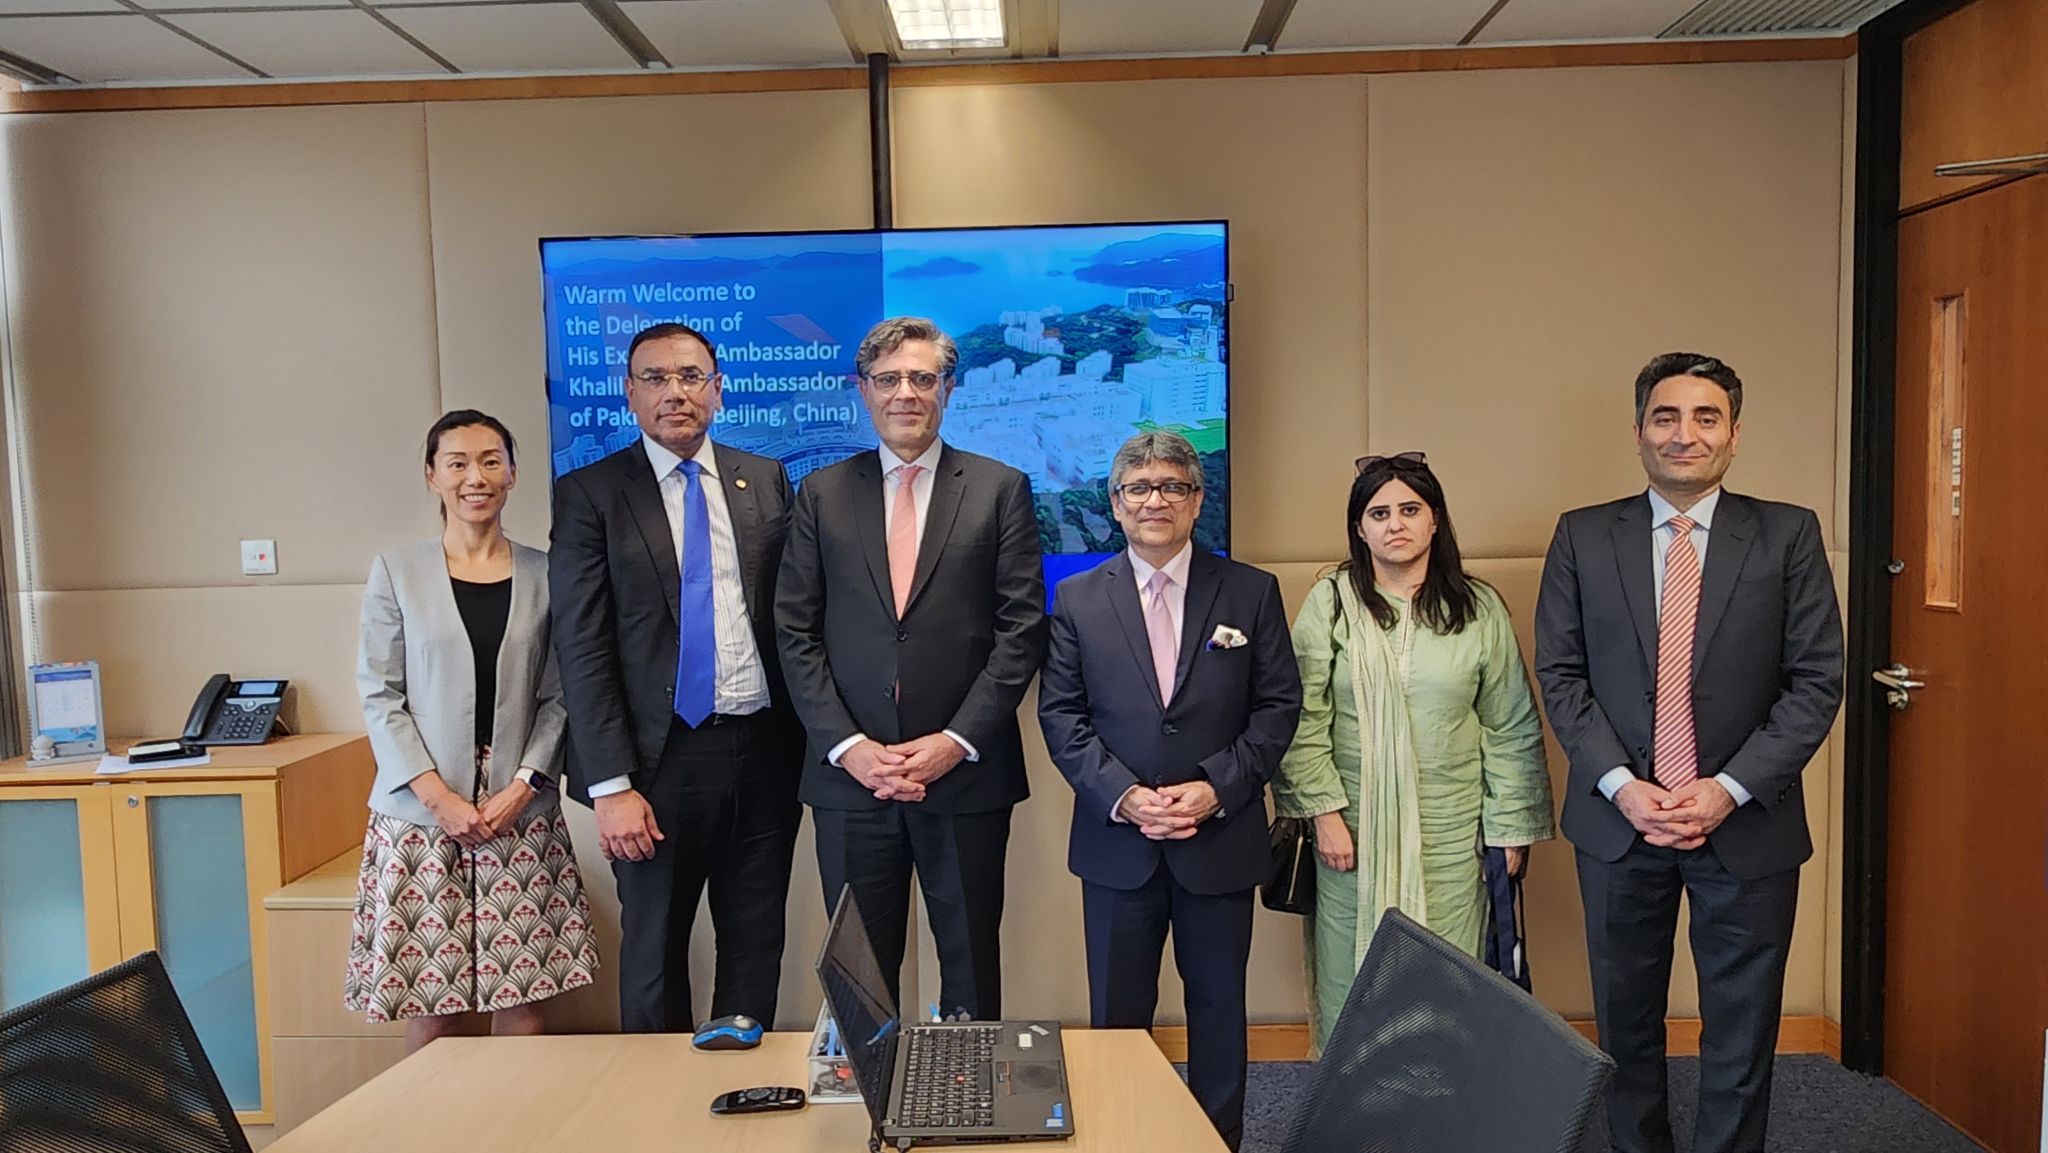 HKUST Acting Head of Public Policy Prof. Naubahar SHARIF (second left) and Director of Undergraduate Recruitment & Admissions Prof. Emily NASON (first left) had meeting with the delegation led by H.E. Khalil HASHMI (third left), Ambassador of the Islamic Republic of Pakistan to China.